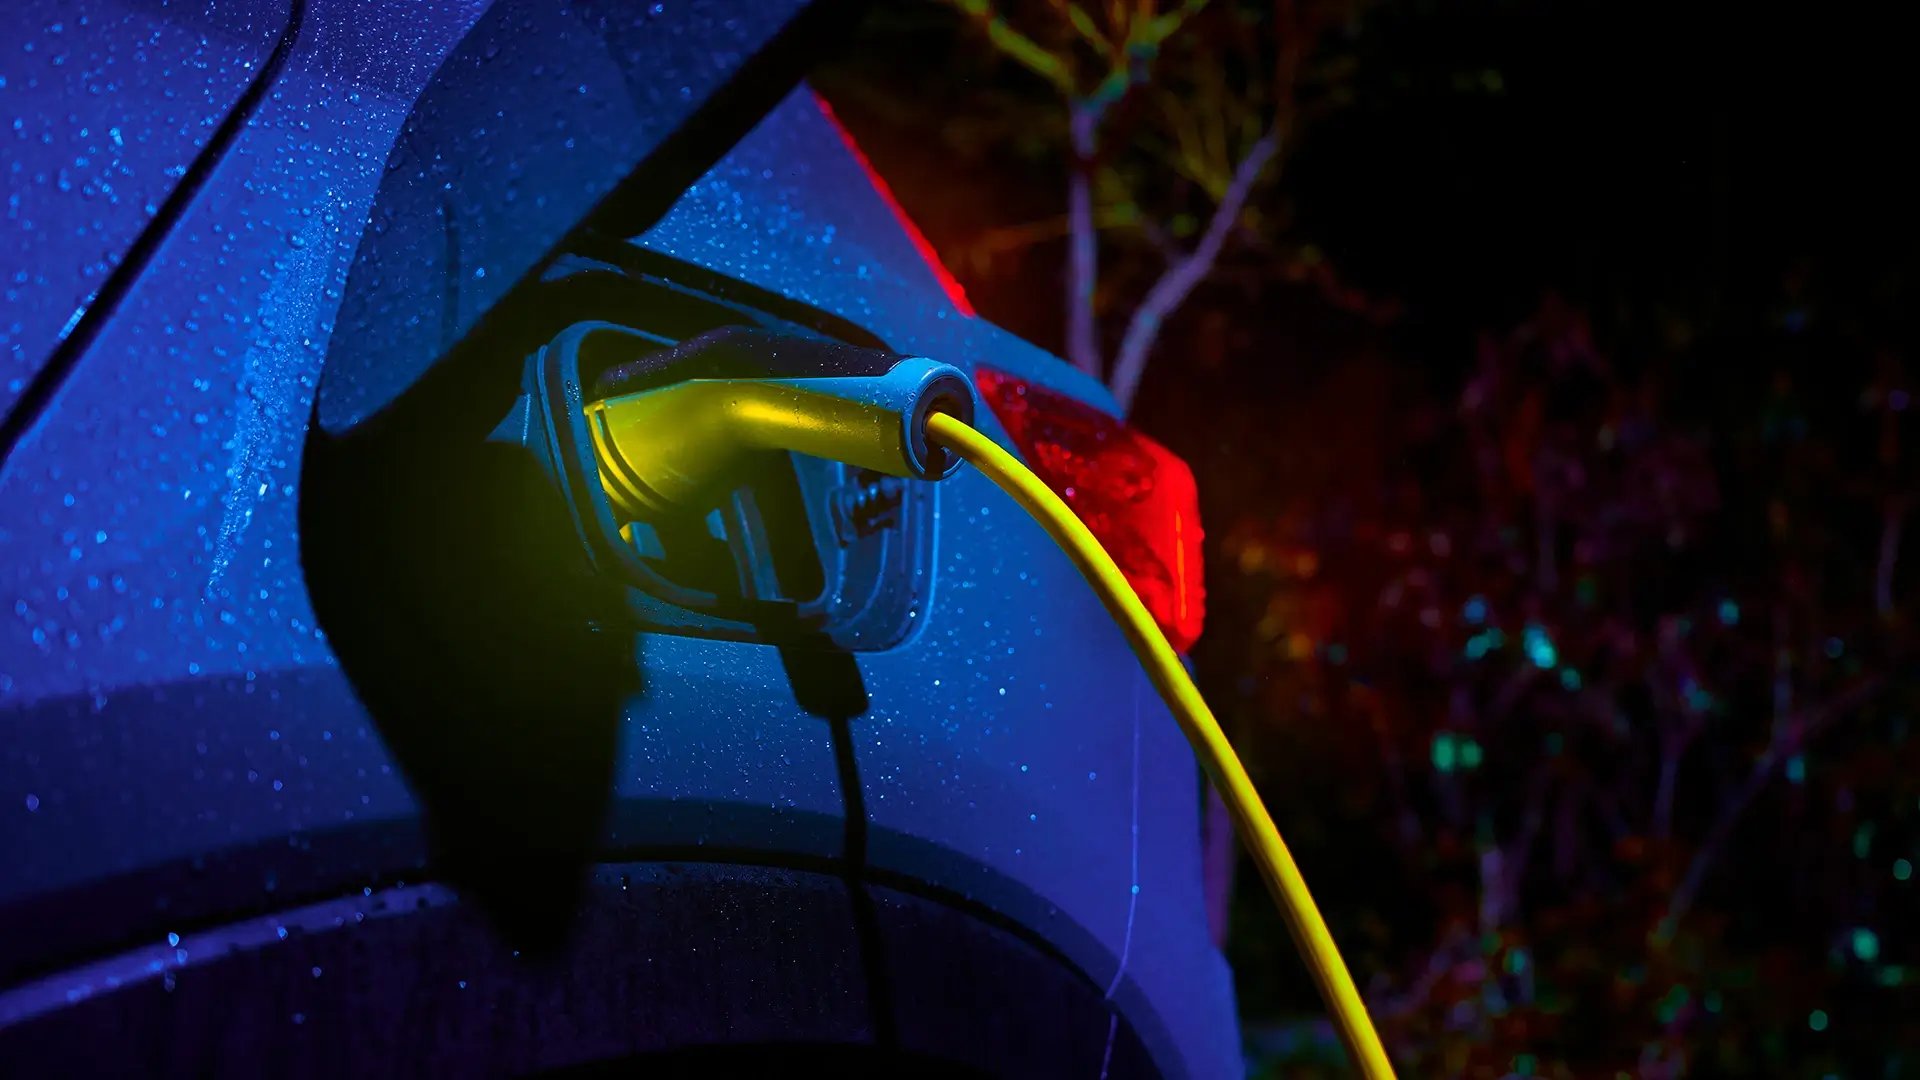 Nighttime EV charging with raindrops on car